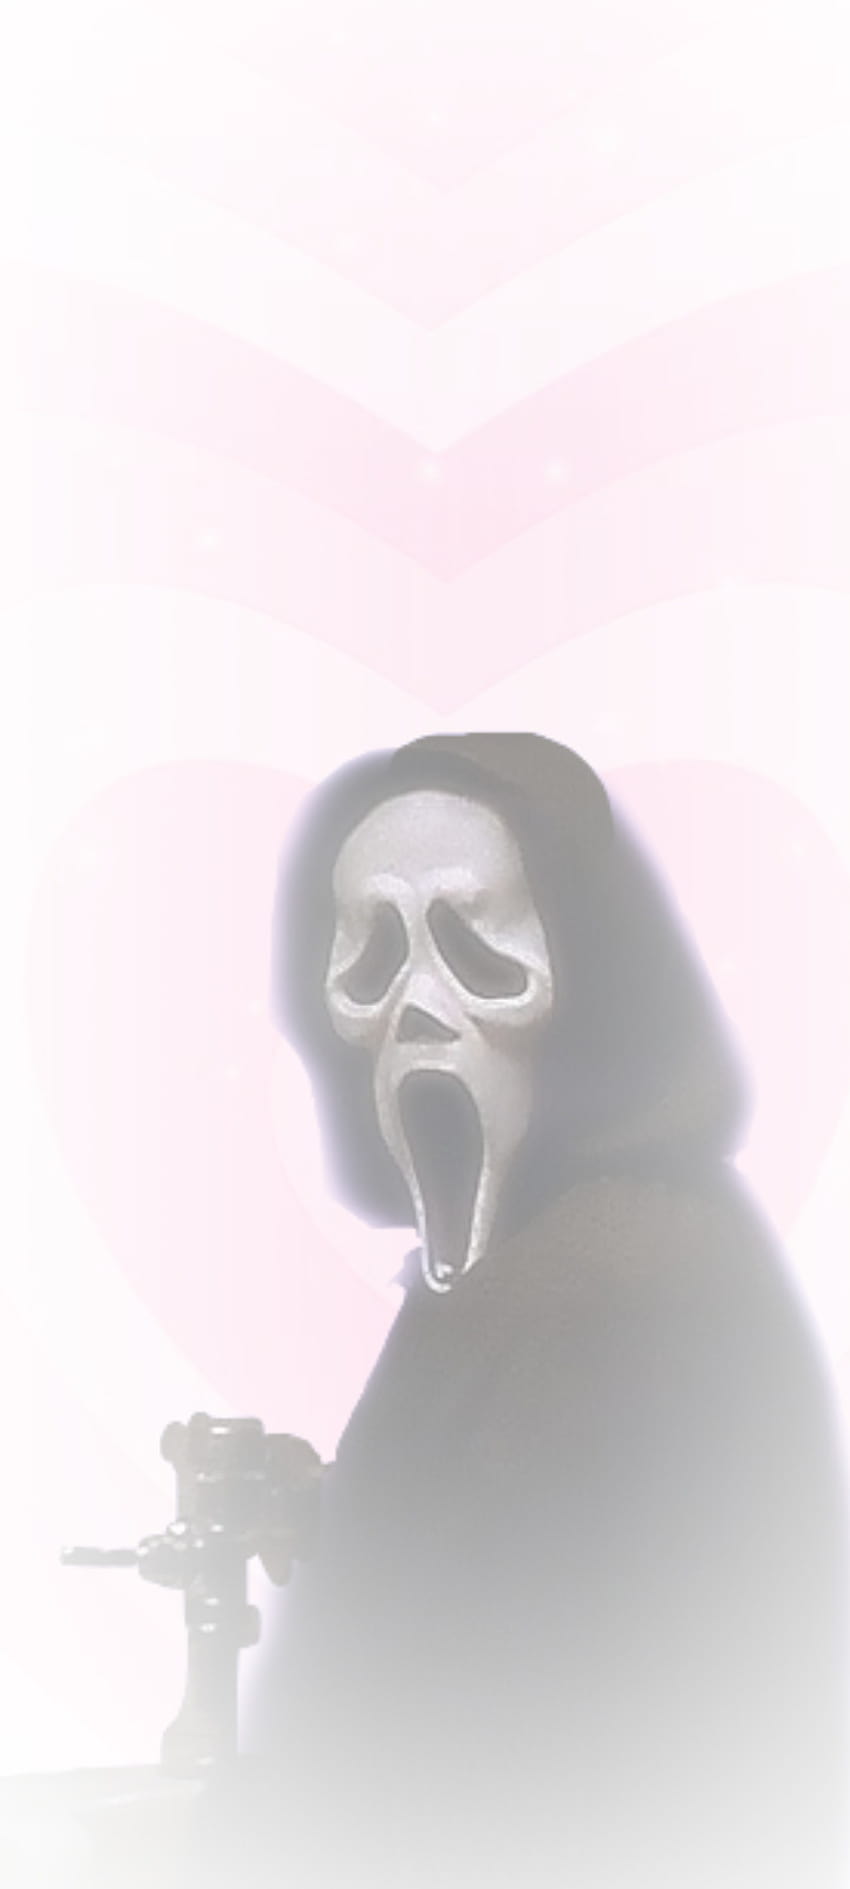 A ghost face scream mask on a white background - Ghostface